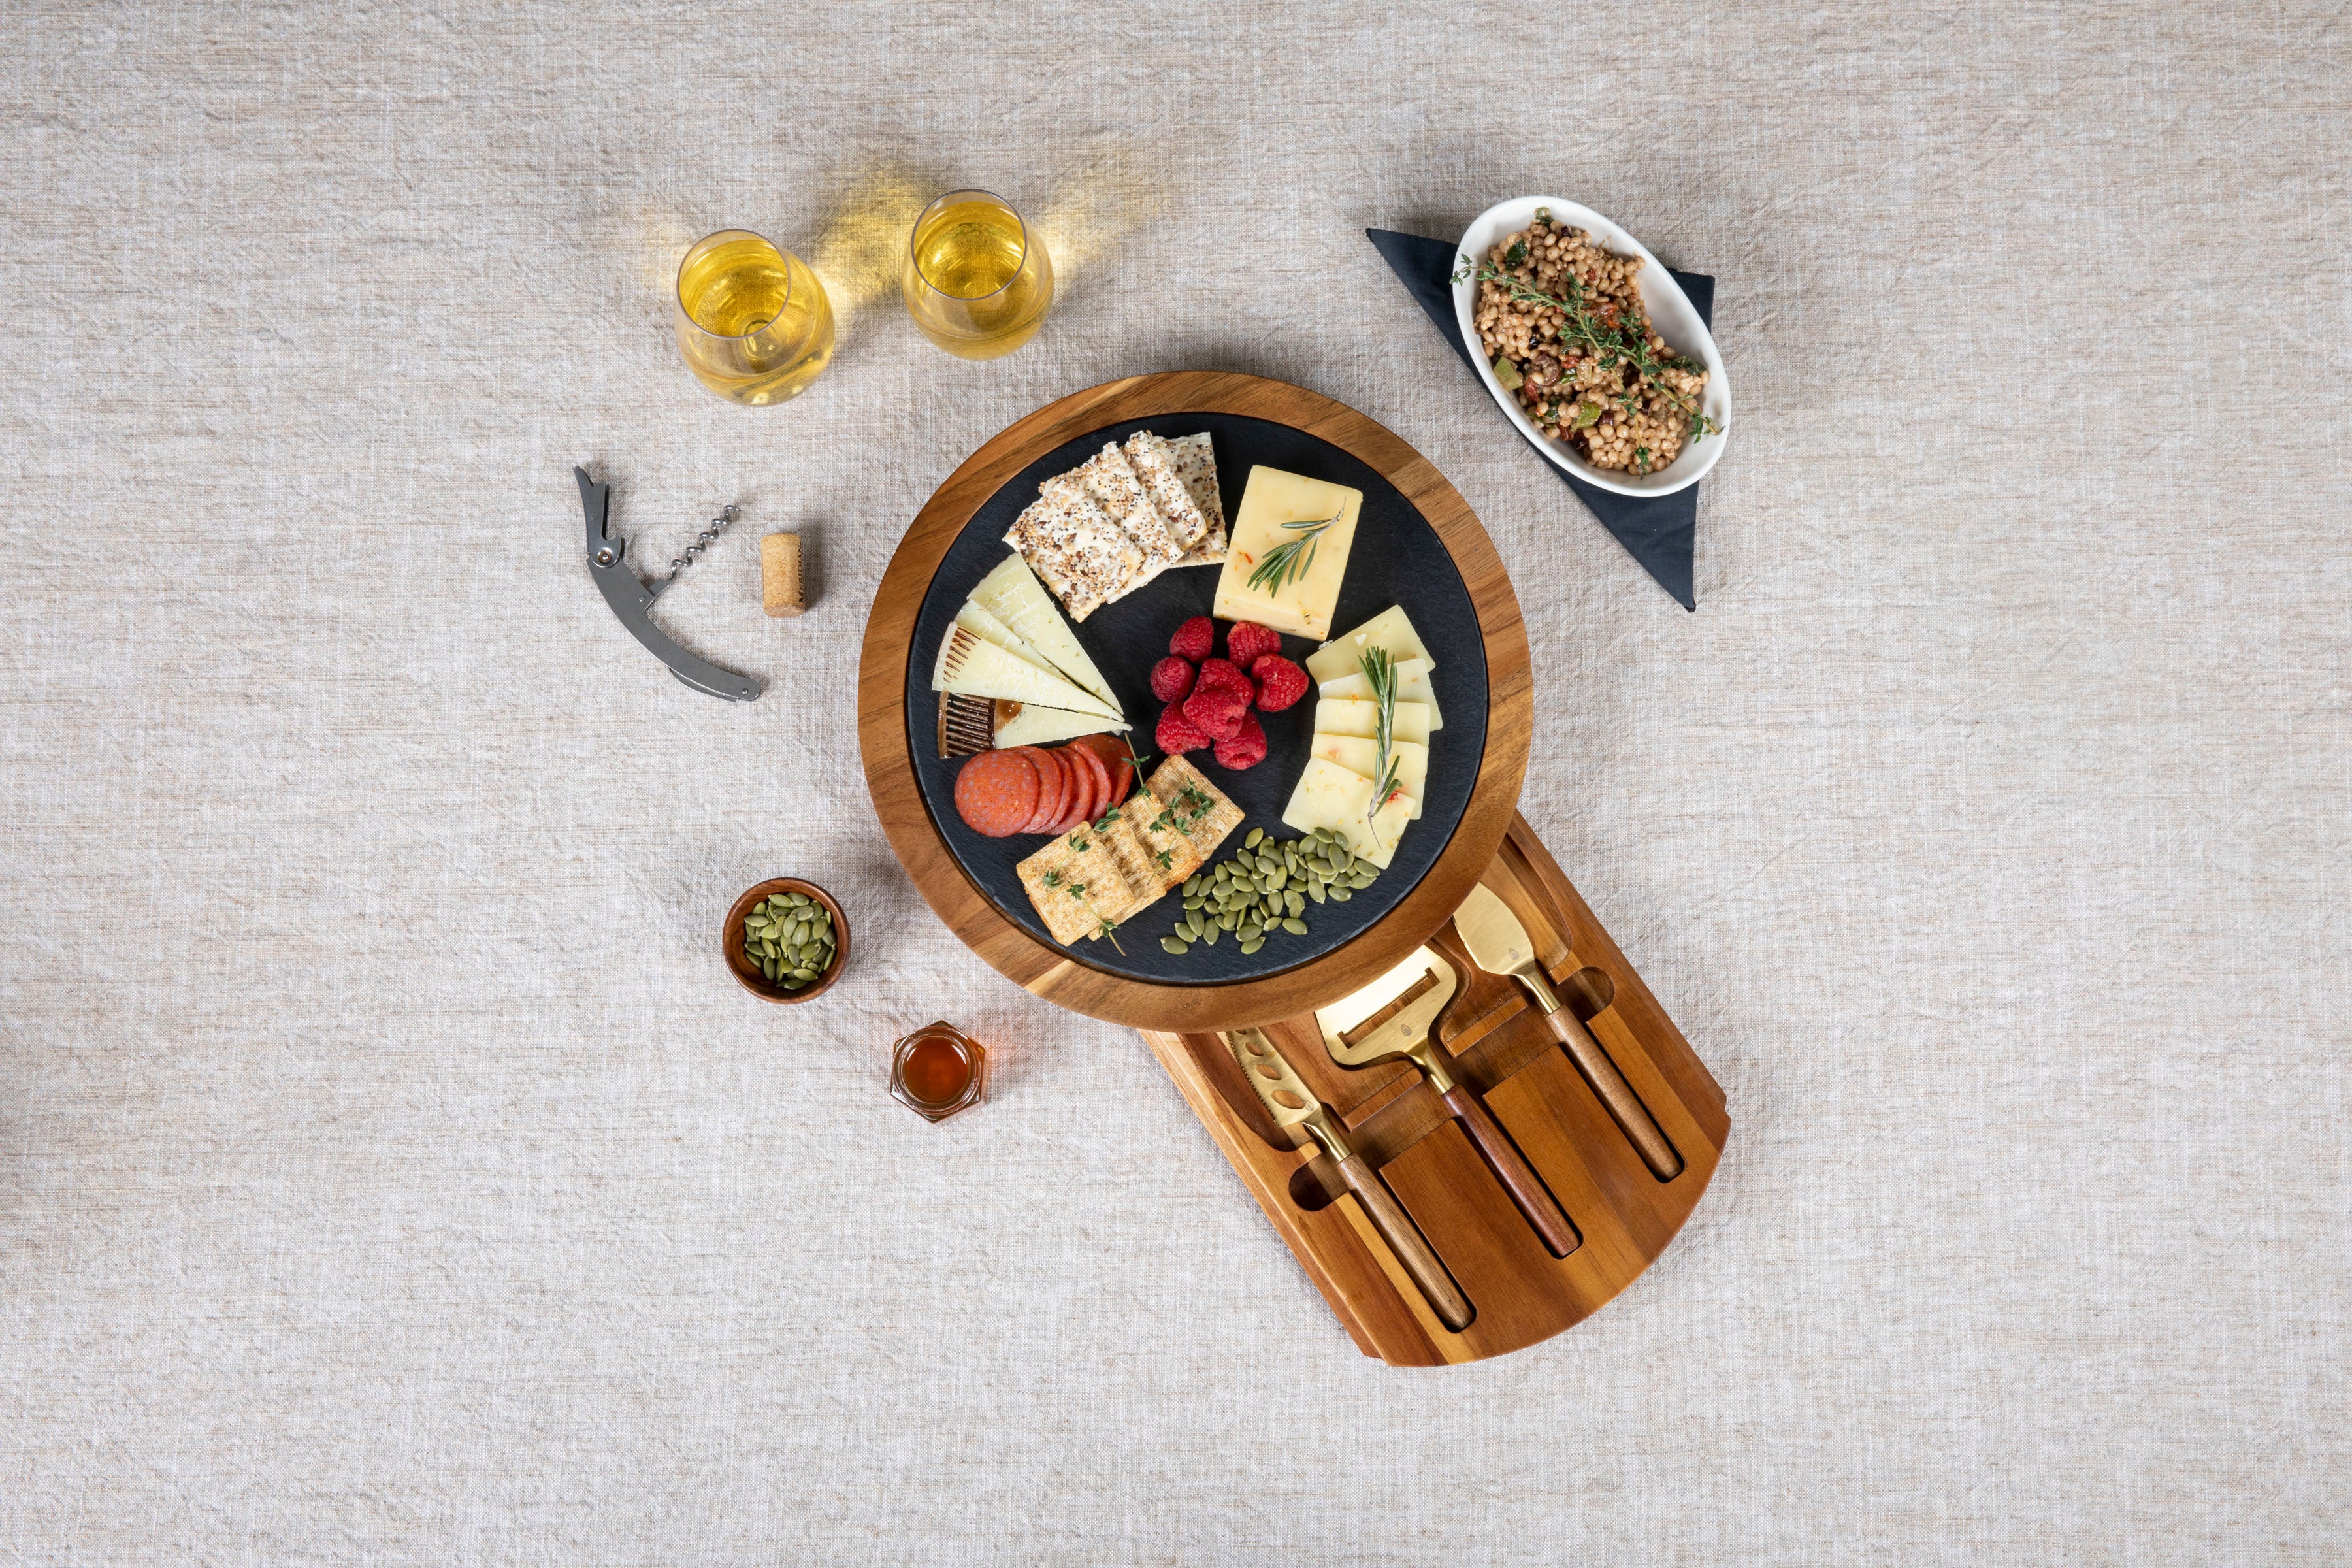 Houston Astros - Insignia Acacia and Slate Serving Board with Cheese Tools